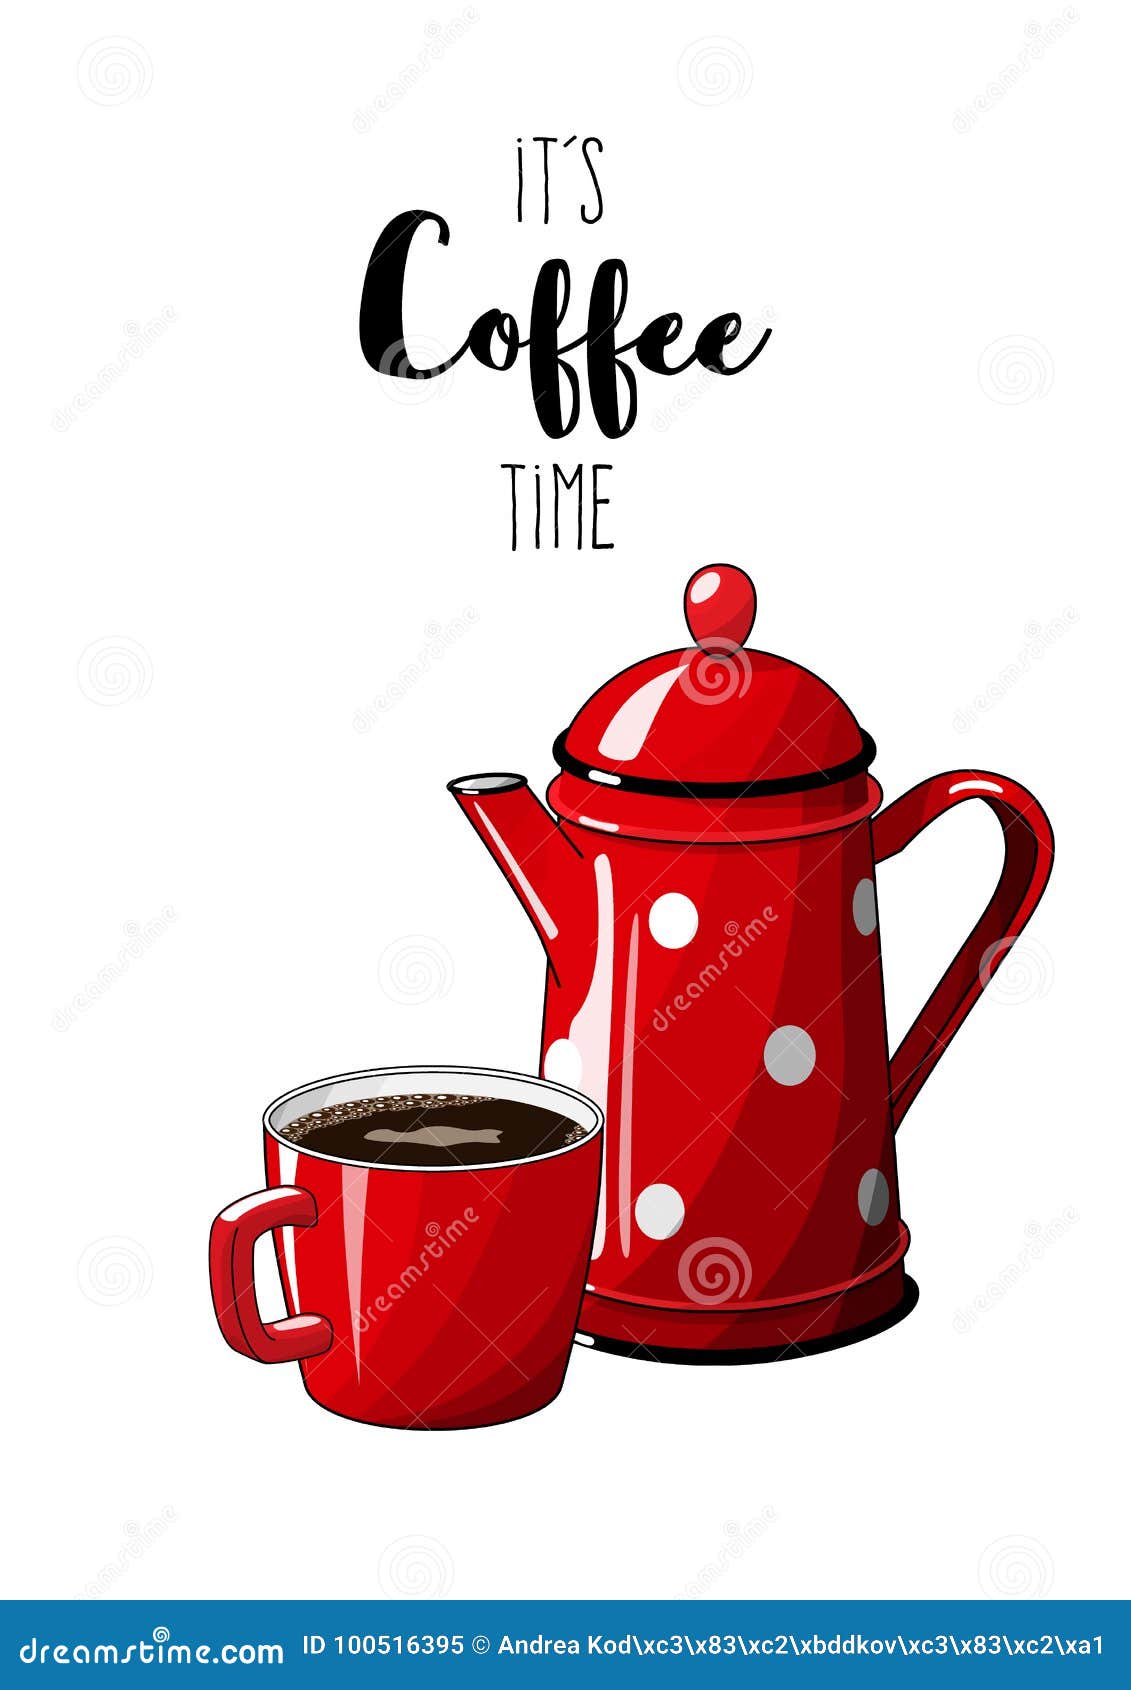 https://thumbs.dreamstime.com/z/red-vintage-coffee-pot-cup-white-background-text-s-coffee-time-illustration-country-style-vector-illustration-100516395.jpg